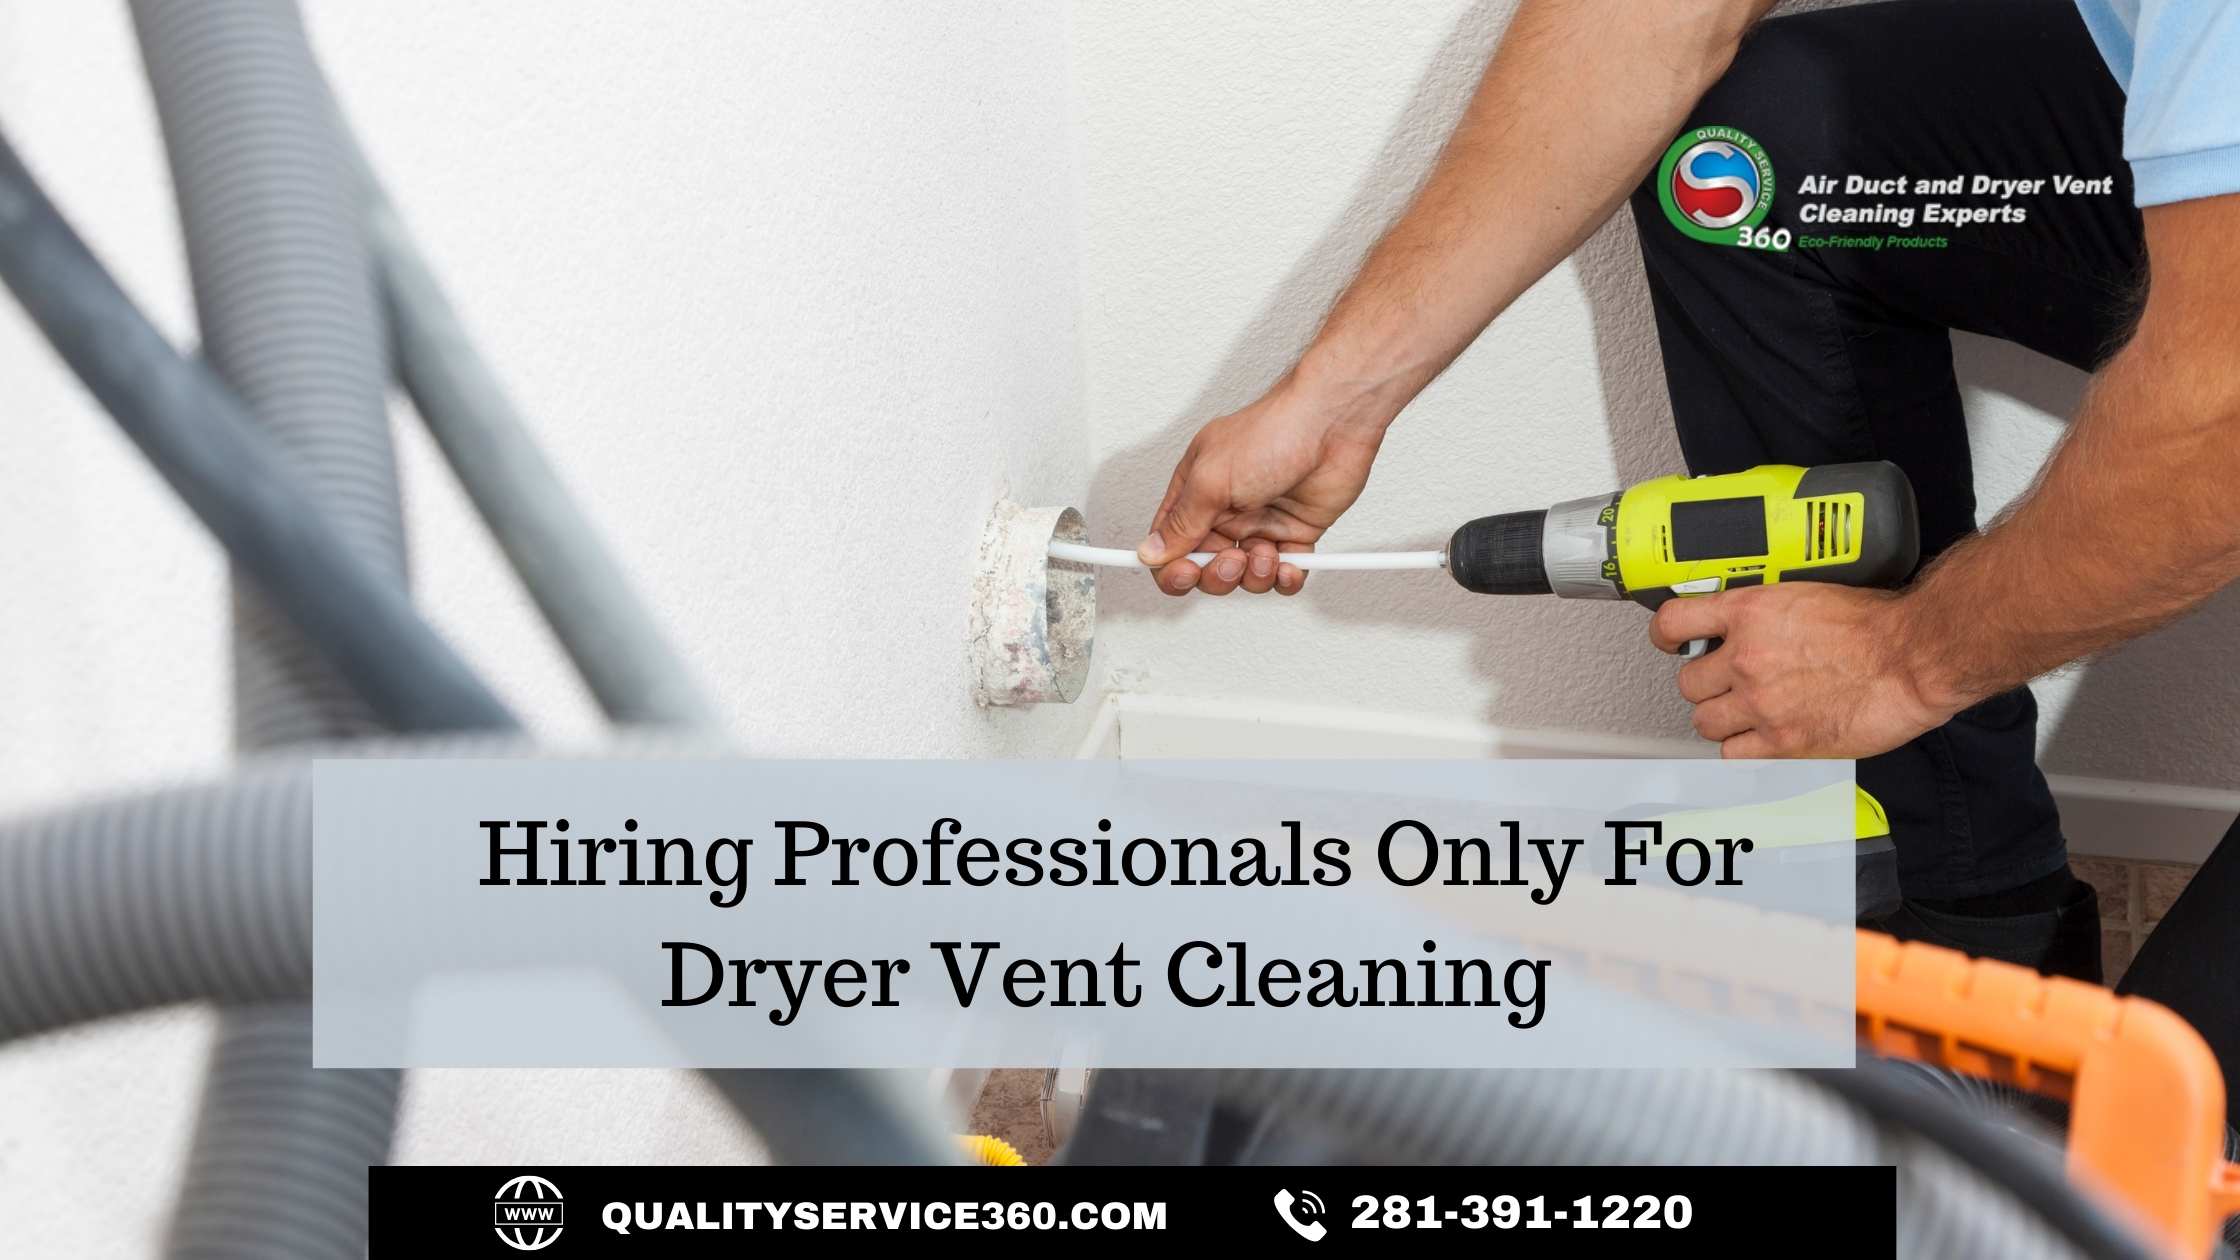 Hiring Professionals Only For Dryer Vent Cleaning Houston | Quality Service 360